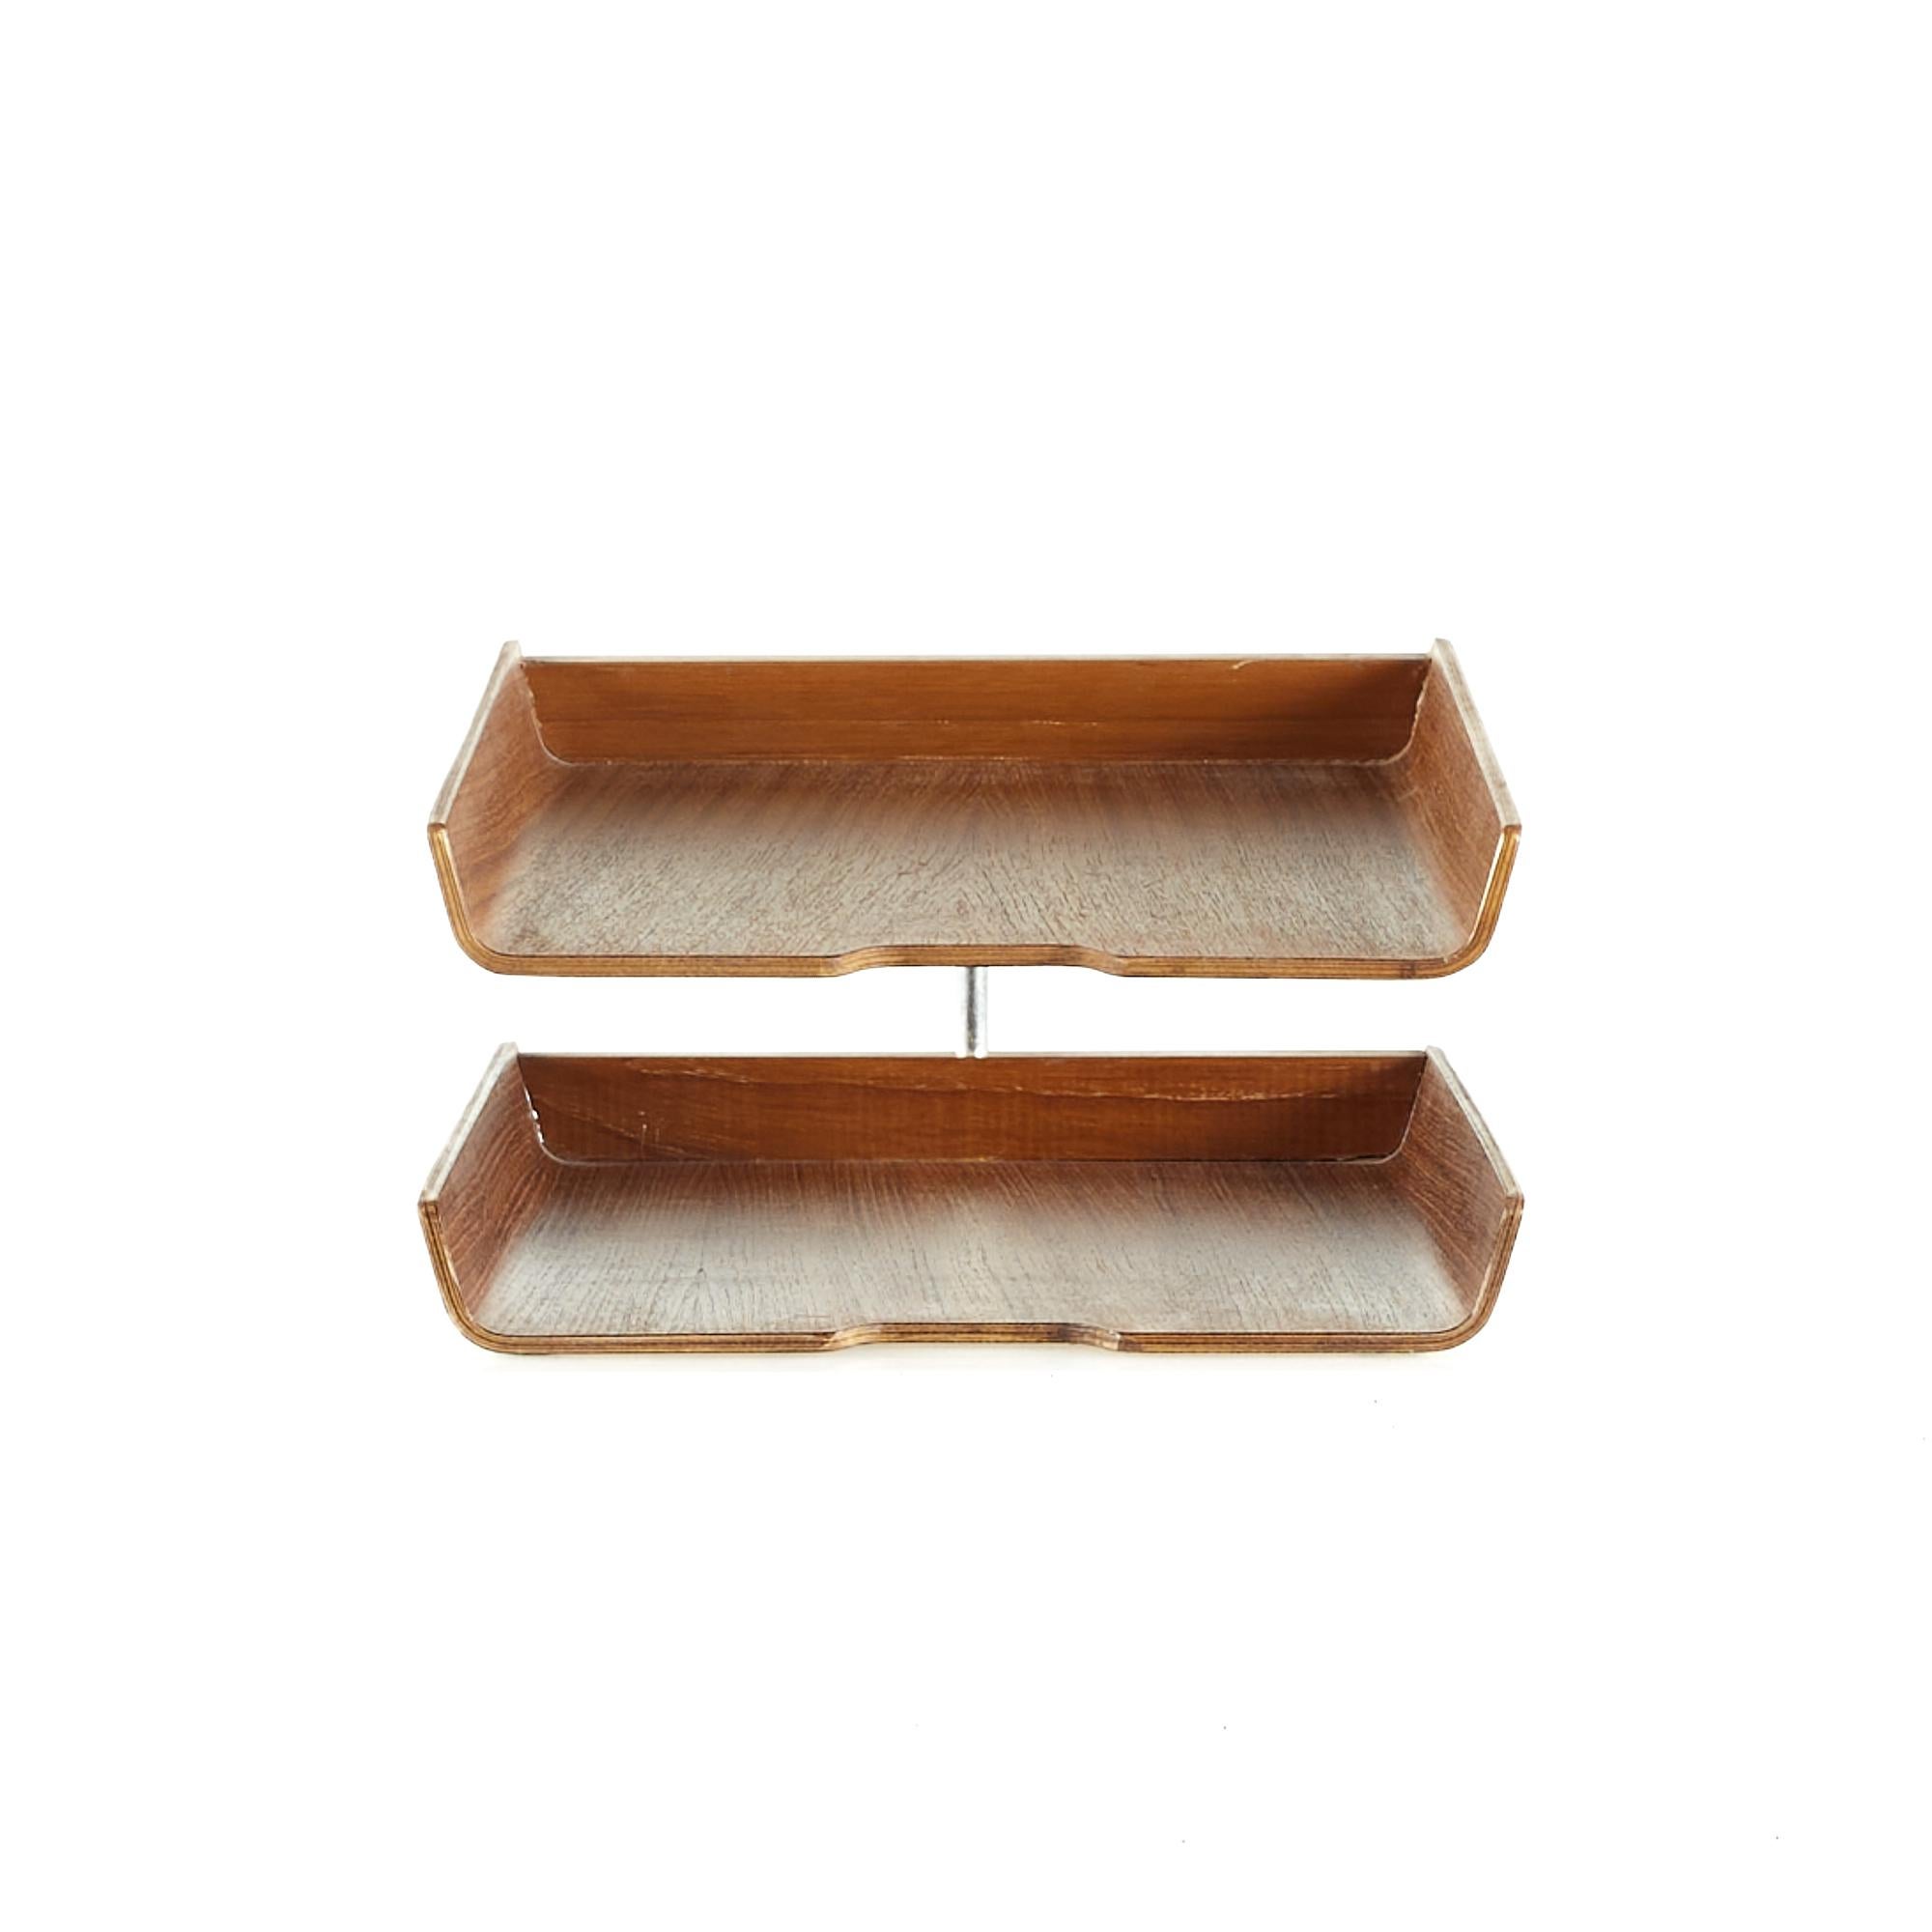 Rainbow midcentury Teak Paper Tray

This paper tray measures: 9.75 wide x 15.25 deep x 5.75 inches high

All pieces of furniture can be had in what we call restored vintage condition. That means the piece is restored upon purchase so it’s free